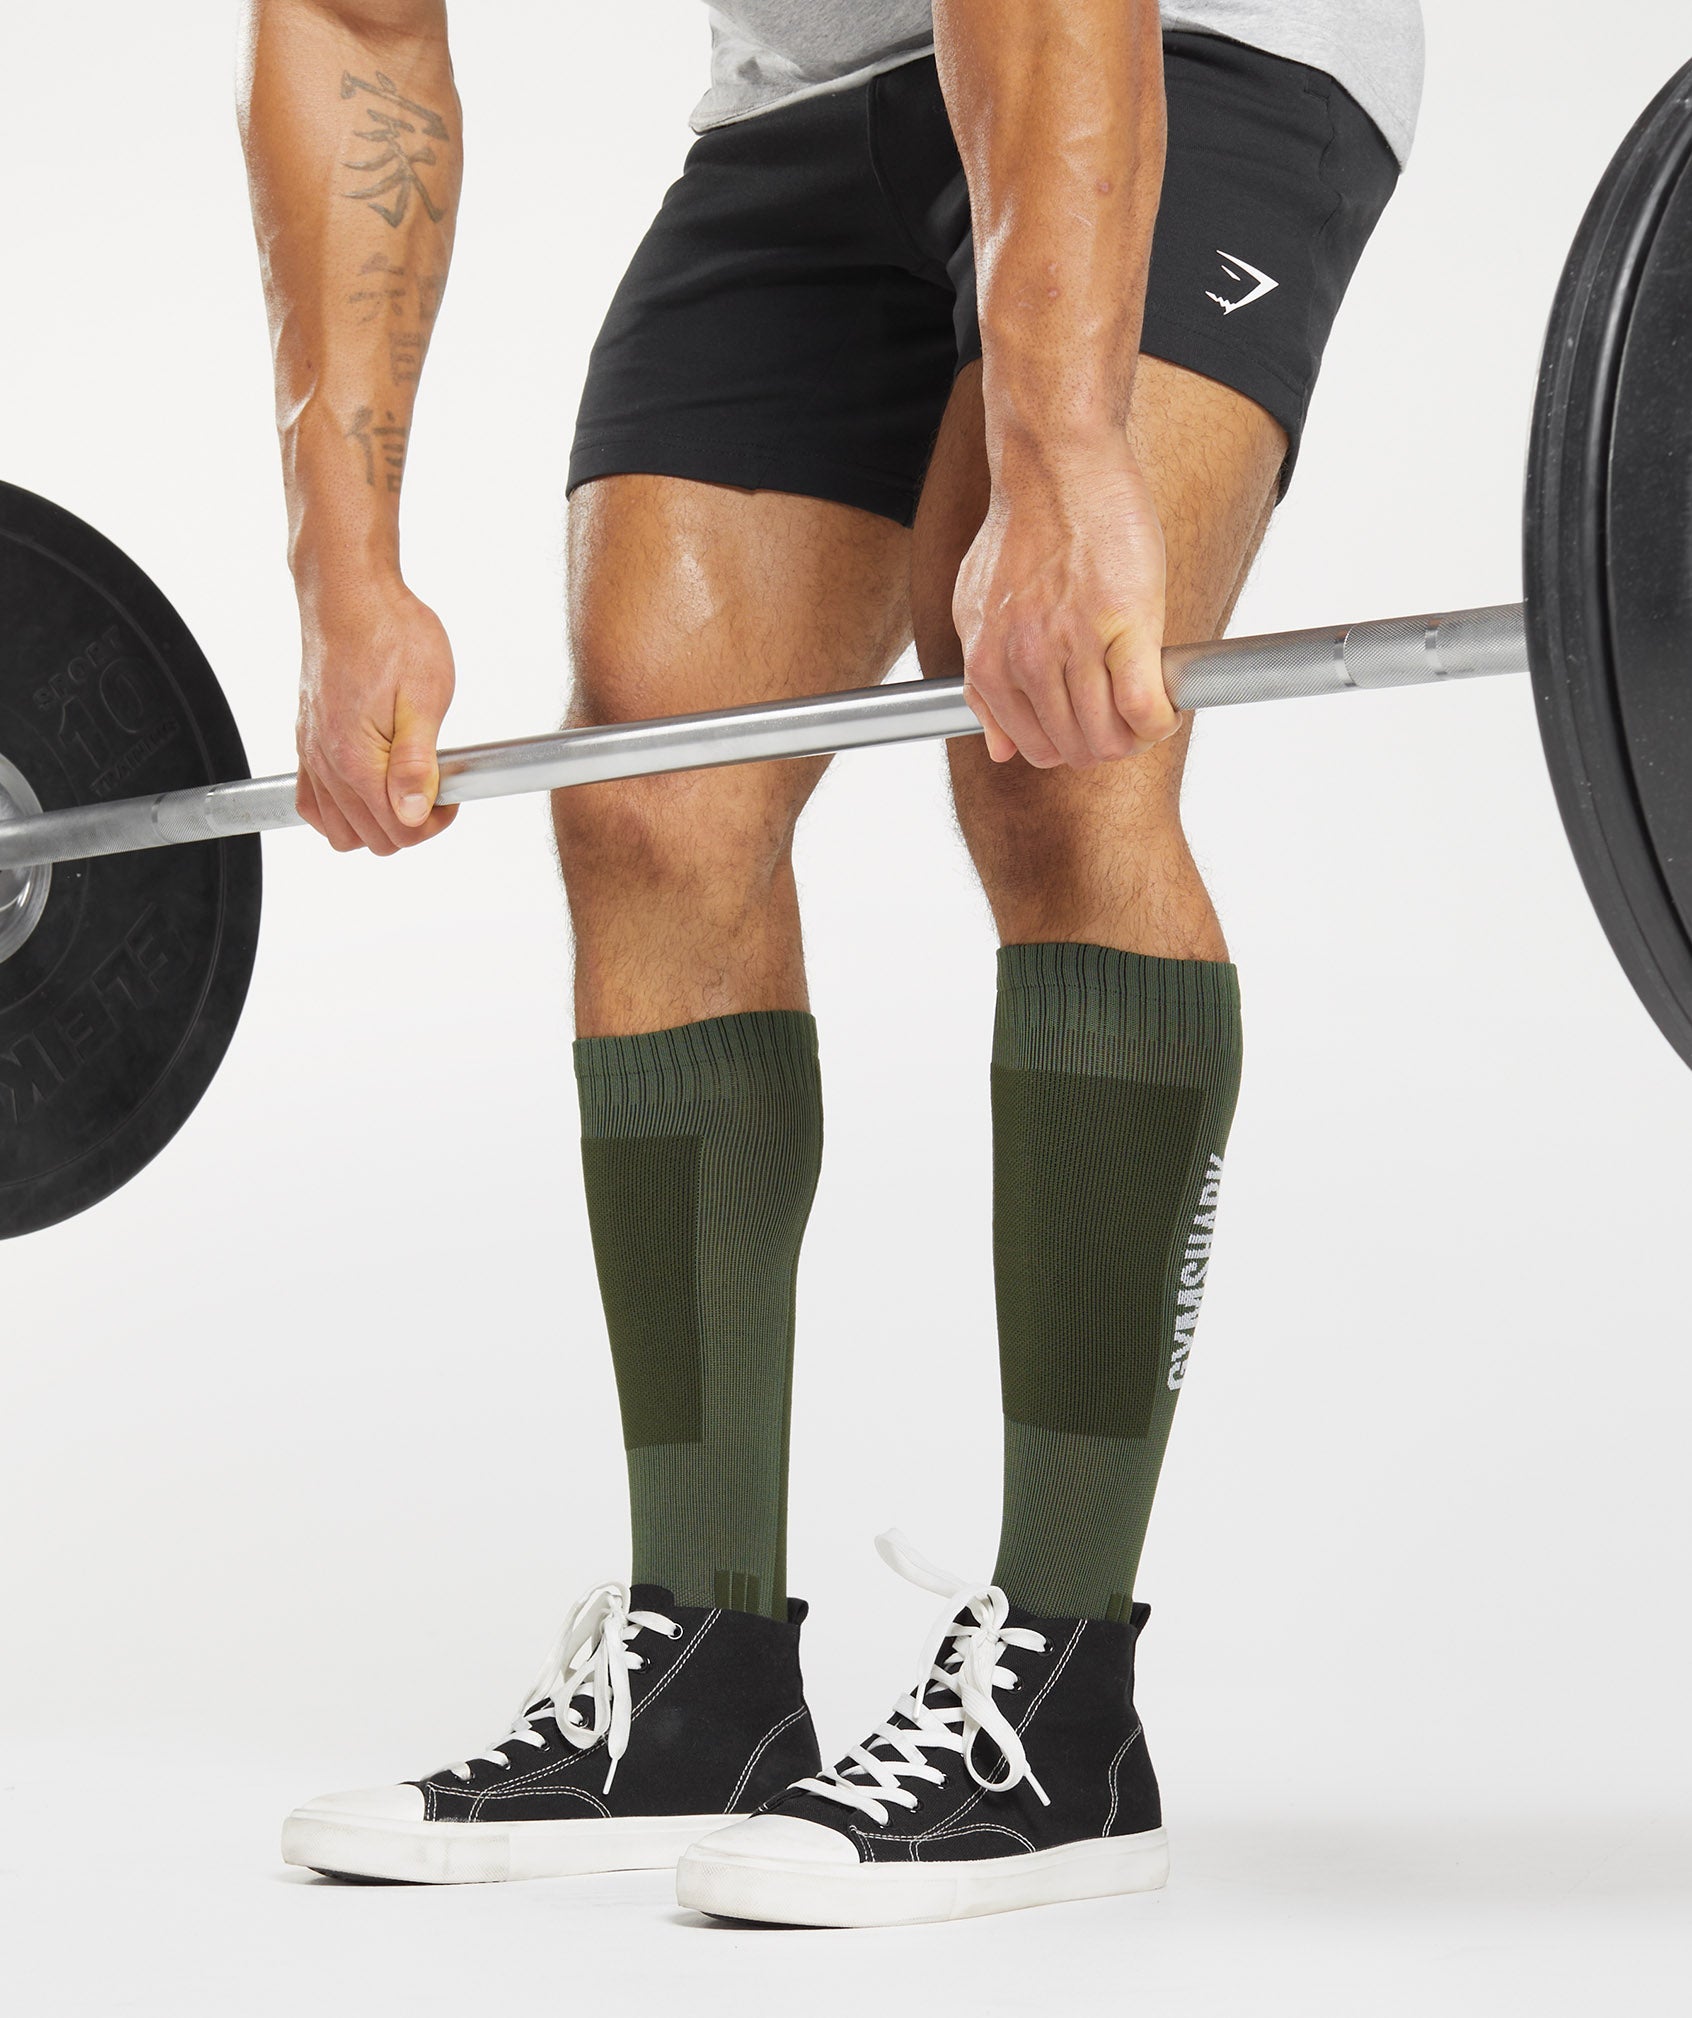 Weightlifting Sock in Olive Green - view 4